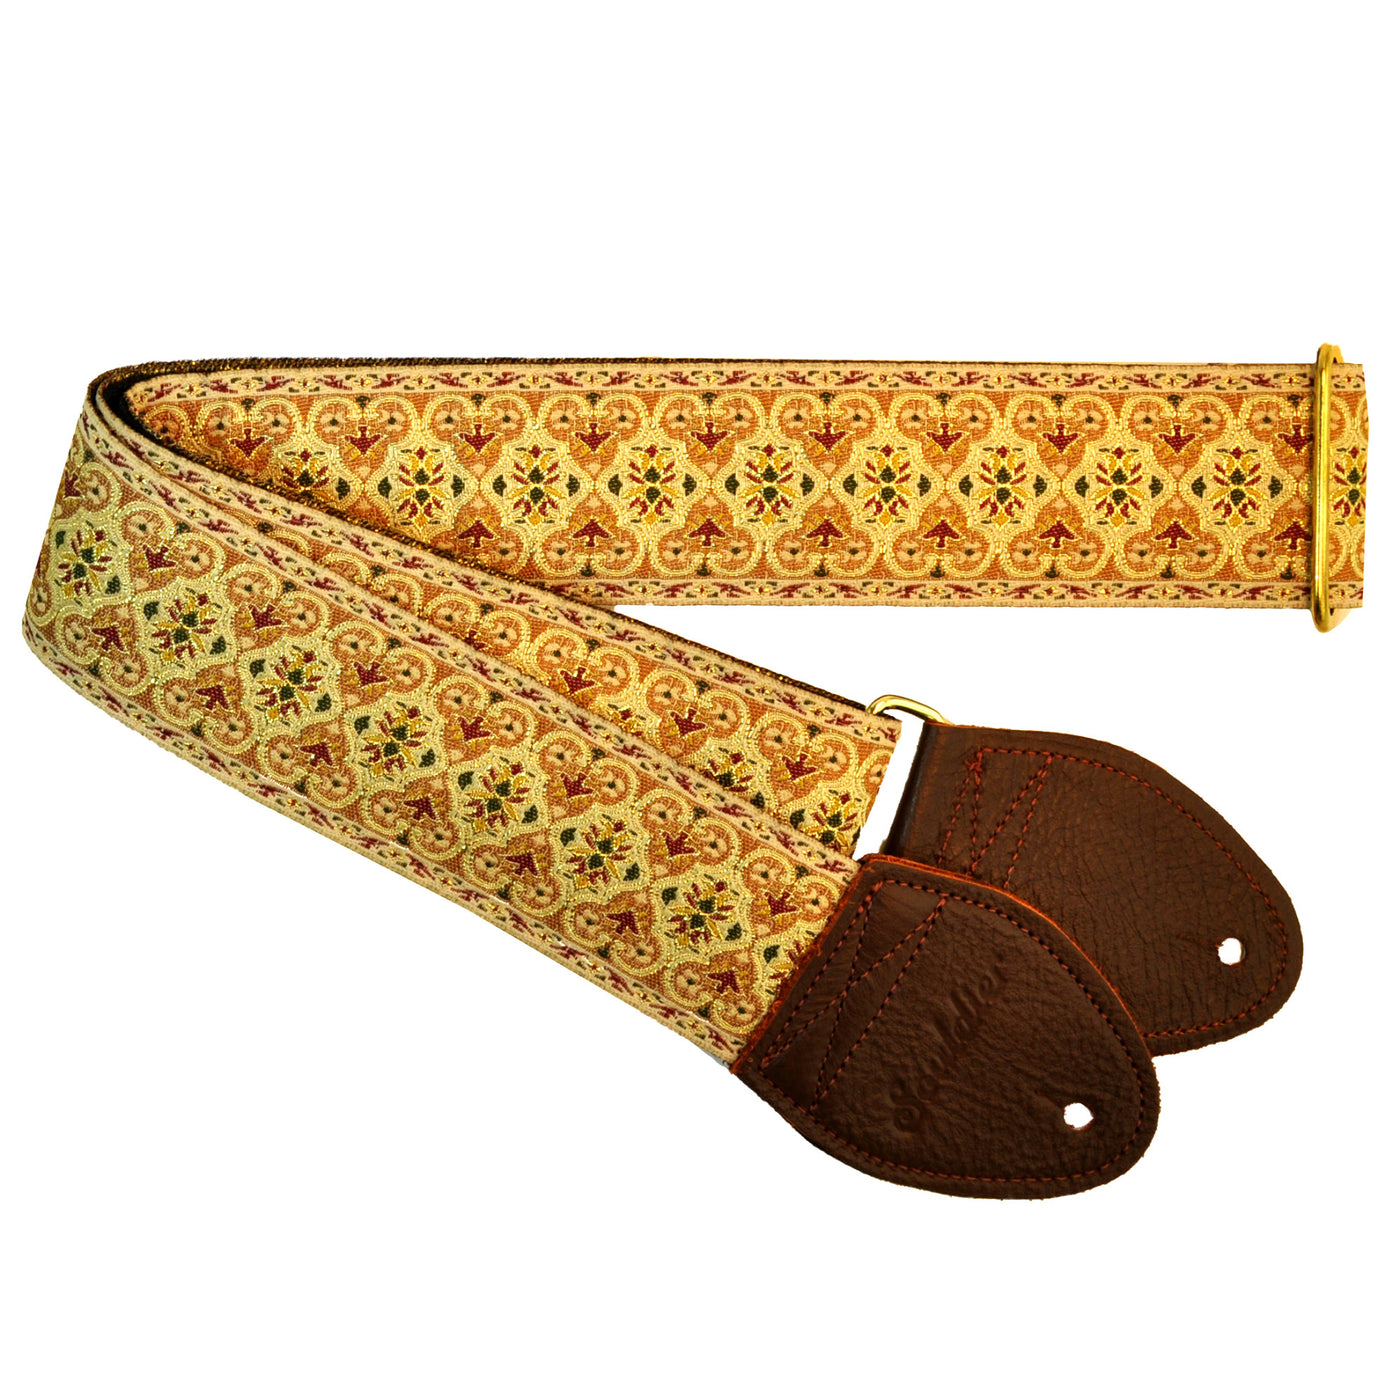 Souldier GS0217BK01BD - Handmade Seatbelt Guitar Strap for Bass, Electric or Acoustic Guitar, 2 Inches Wide and Adjustable Length from 30" to 63"  Made in the USA, Persian, Copper